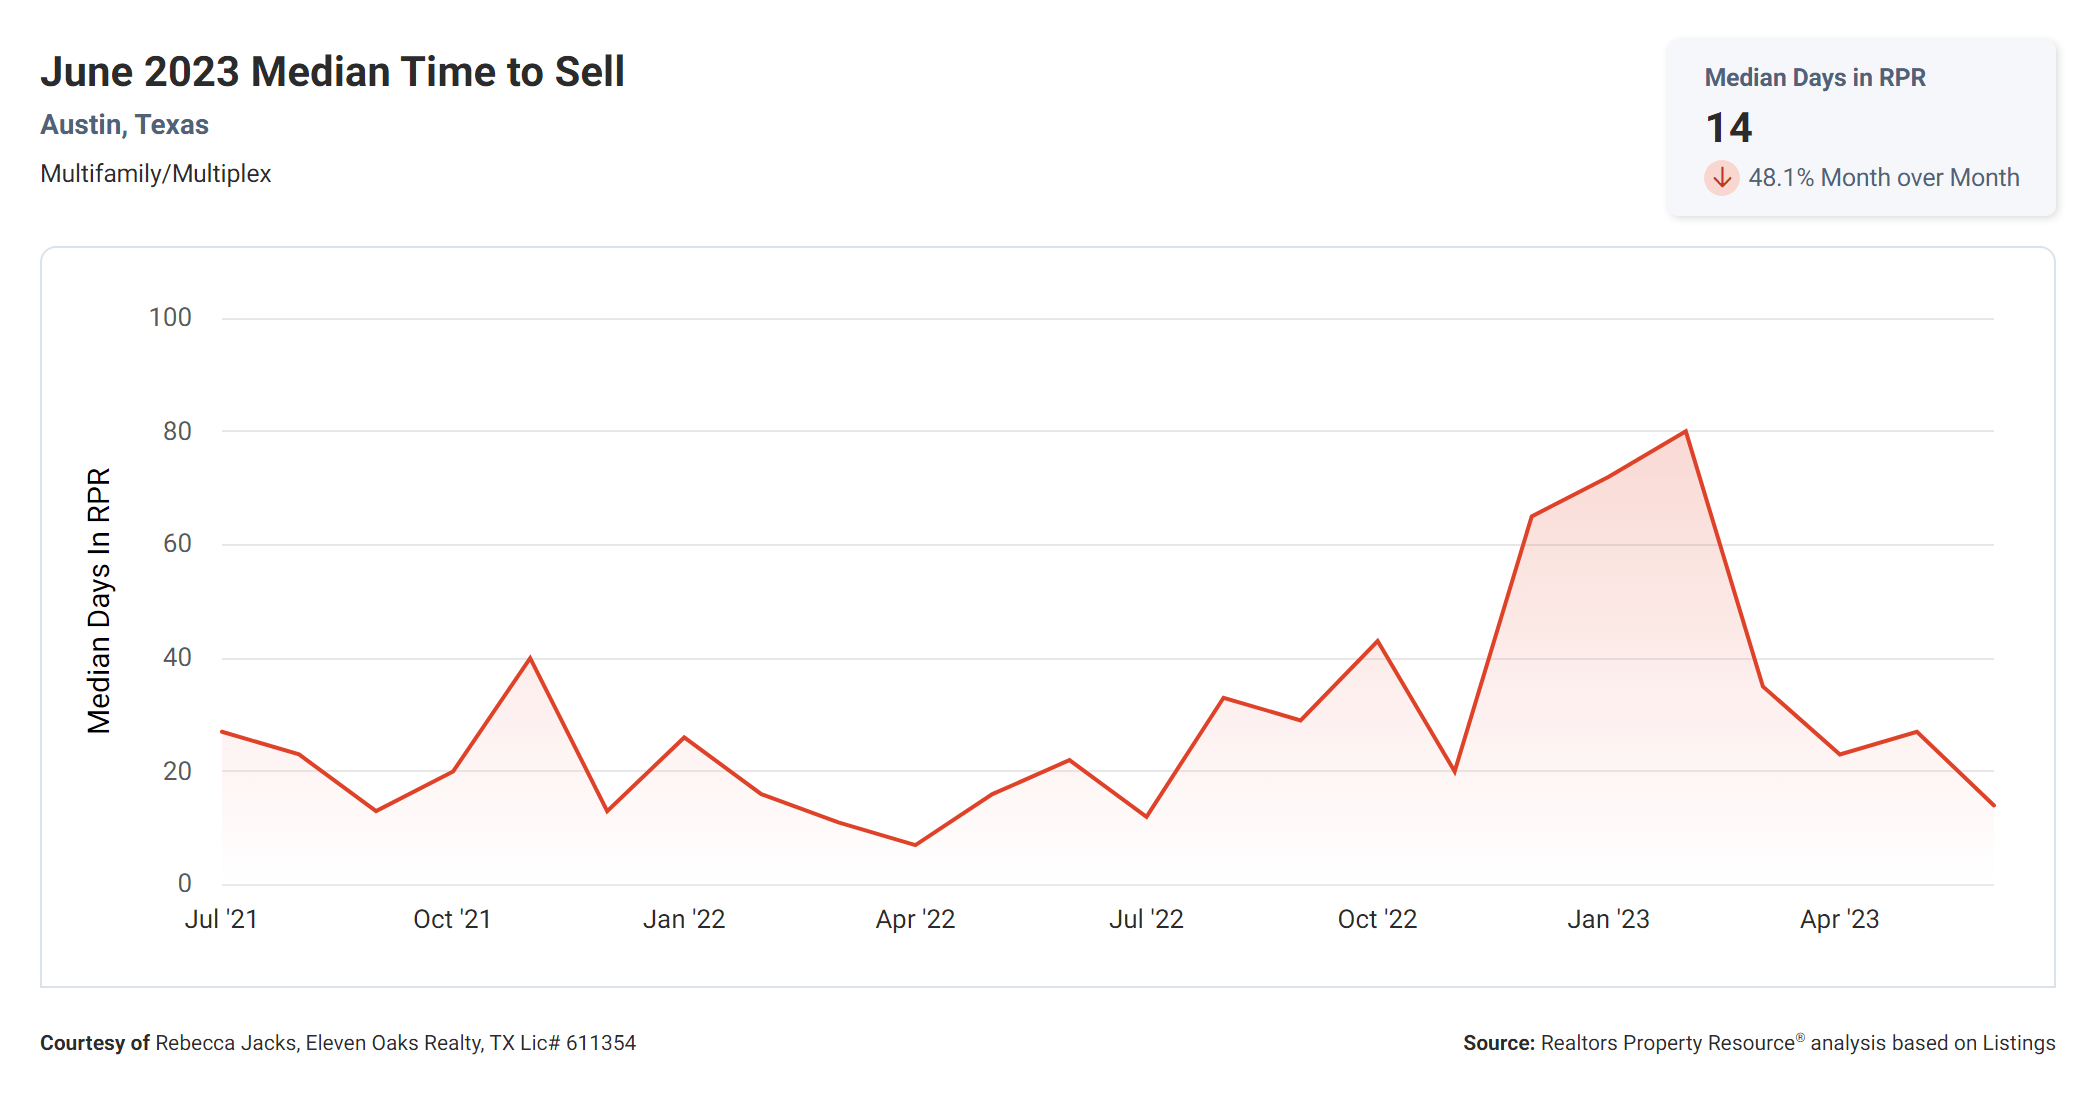 June 2023 median time to sell Austin multi family property